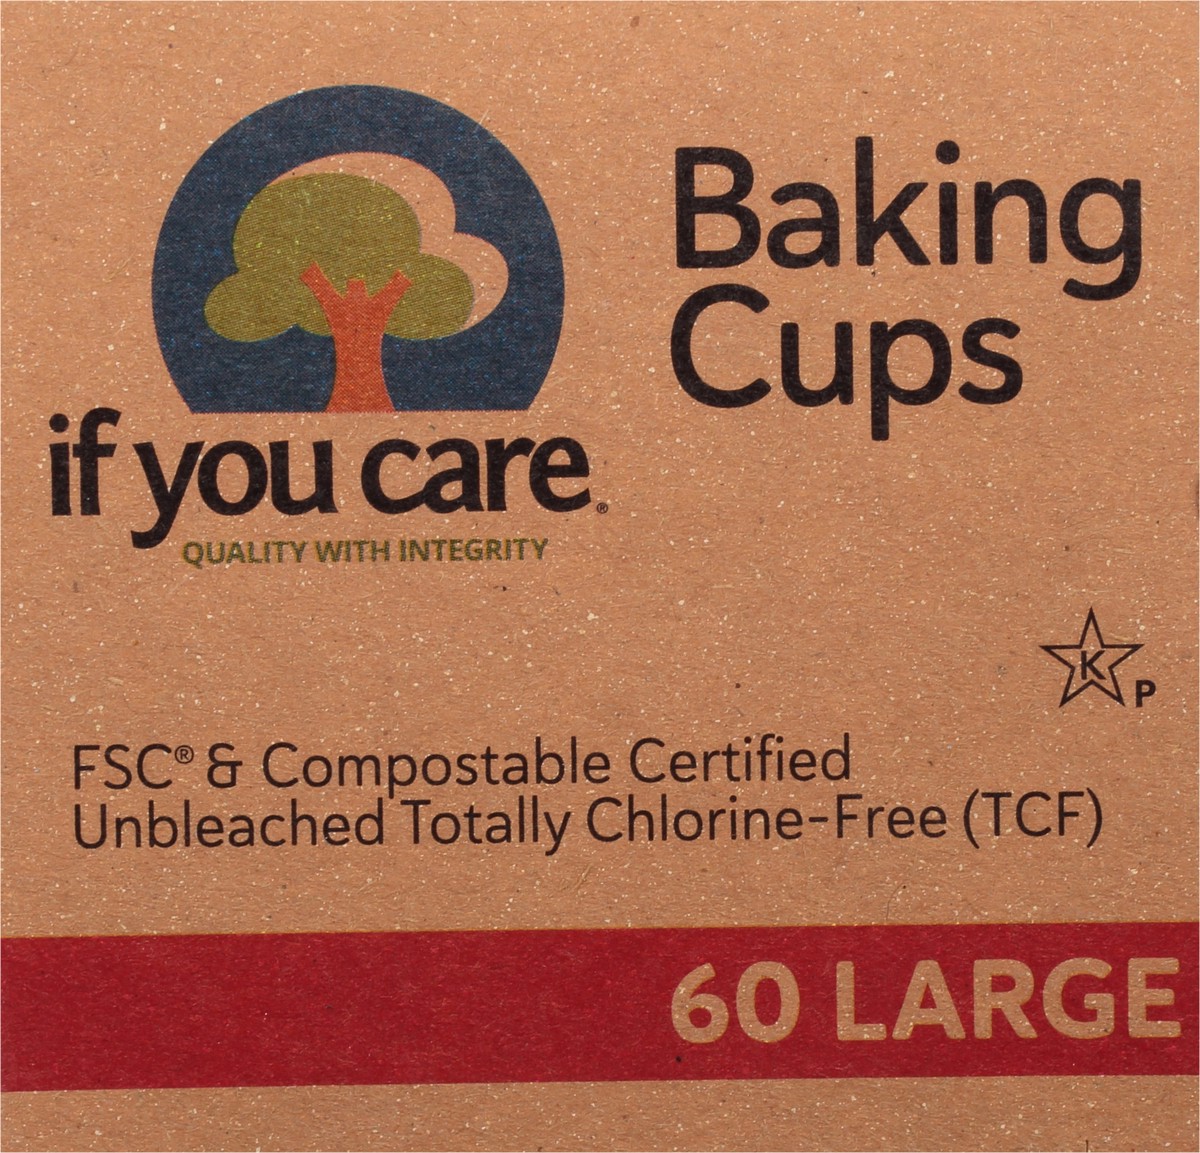 slide 9 of 9, If You Care Large Baking Cups 60 ea, 60 ct